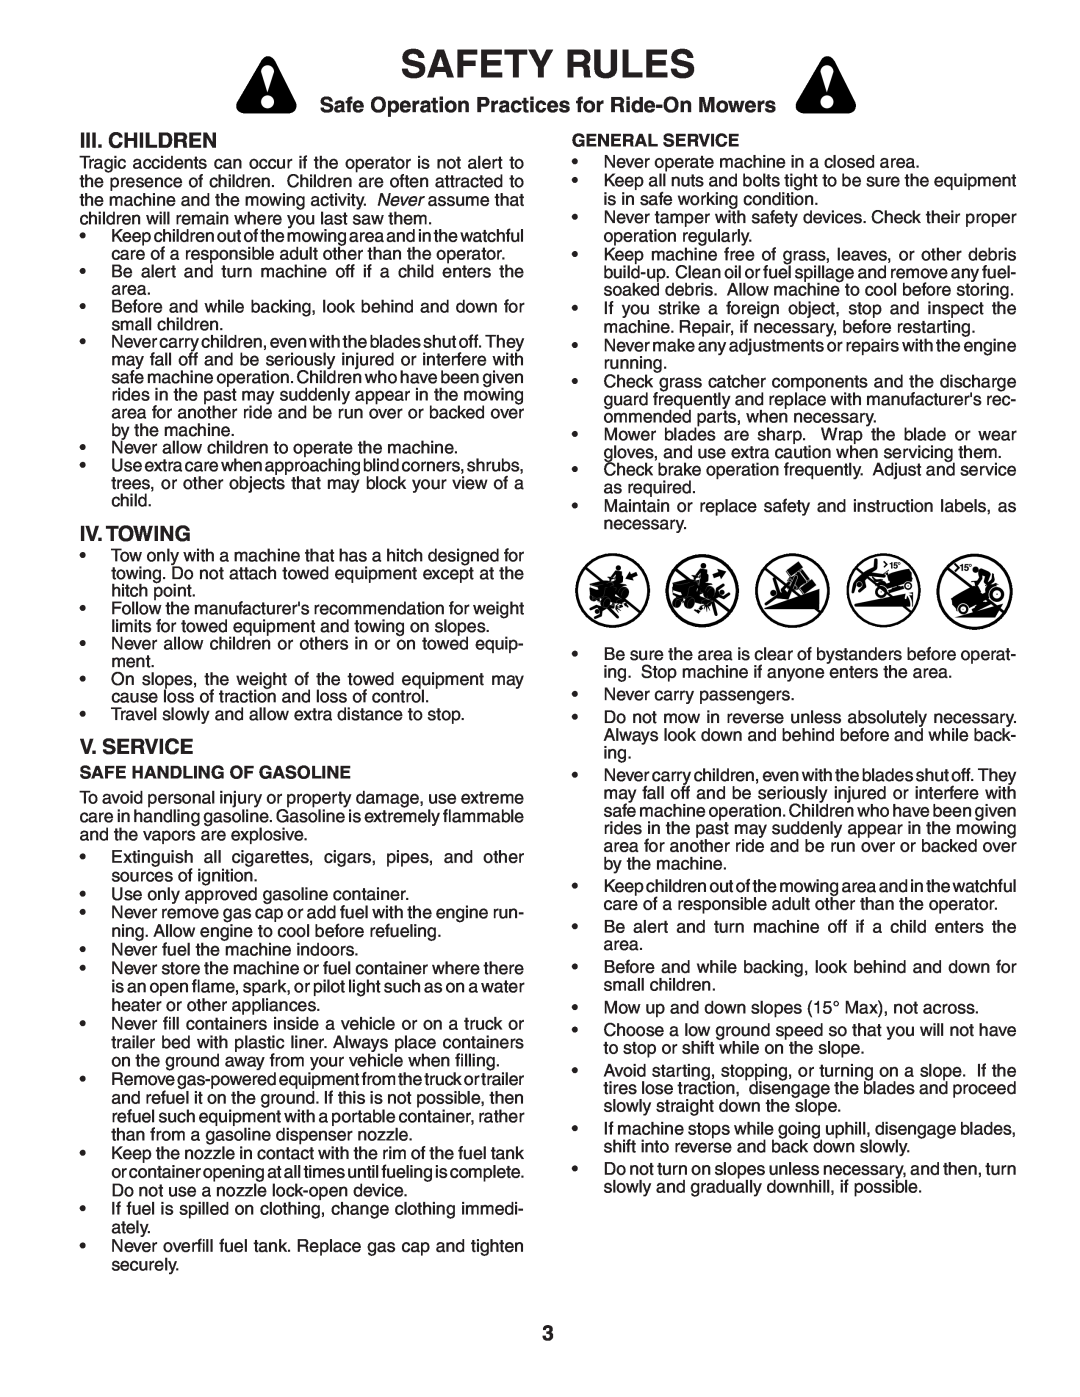 Poulan PB185H42LT manual Iii. Children, Iv. Towing, V. Service, Safety Rules, Safe Operation Practices for Ride-On Mowers 